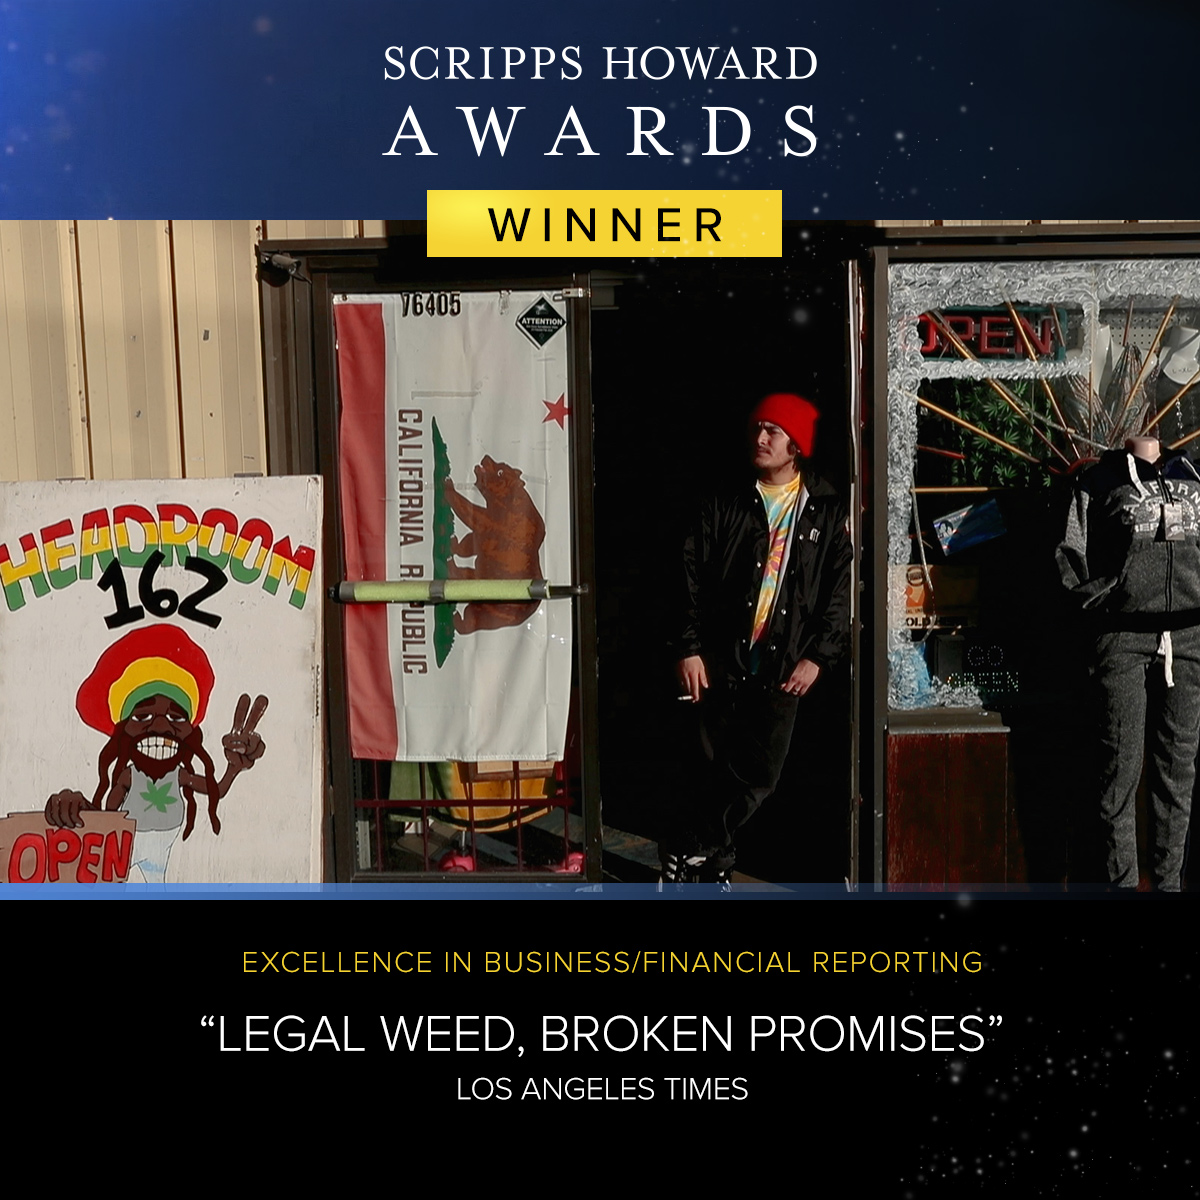 The Scripps Howard Award for Excellence in Business/Financial Reporting: Los Angeles Times – “Legal Weed, Broken Promises” The #ScrippsHowardAwards are happening NOW on @ScrippsNews. Watch @latimes’ reporting: scripps.com/fund/journalis…